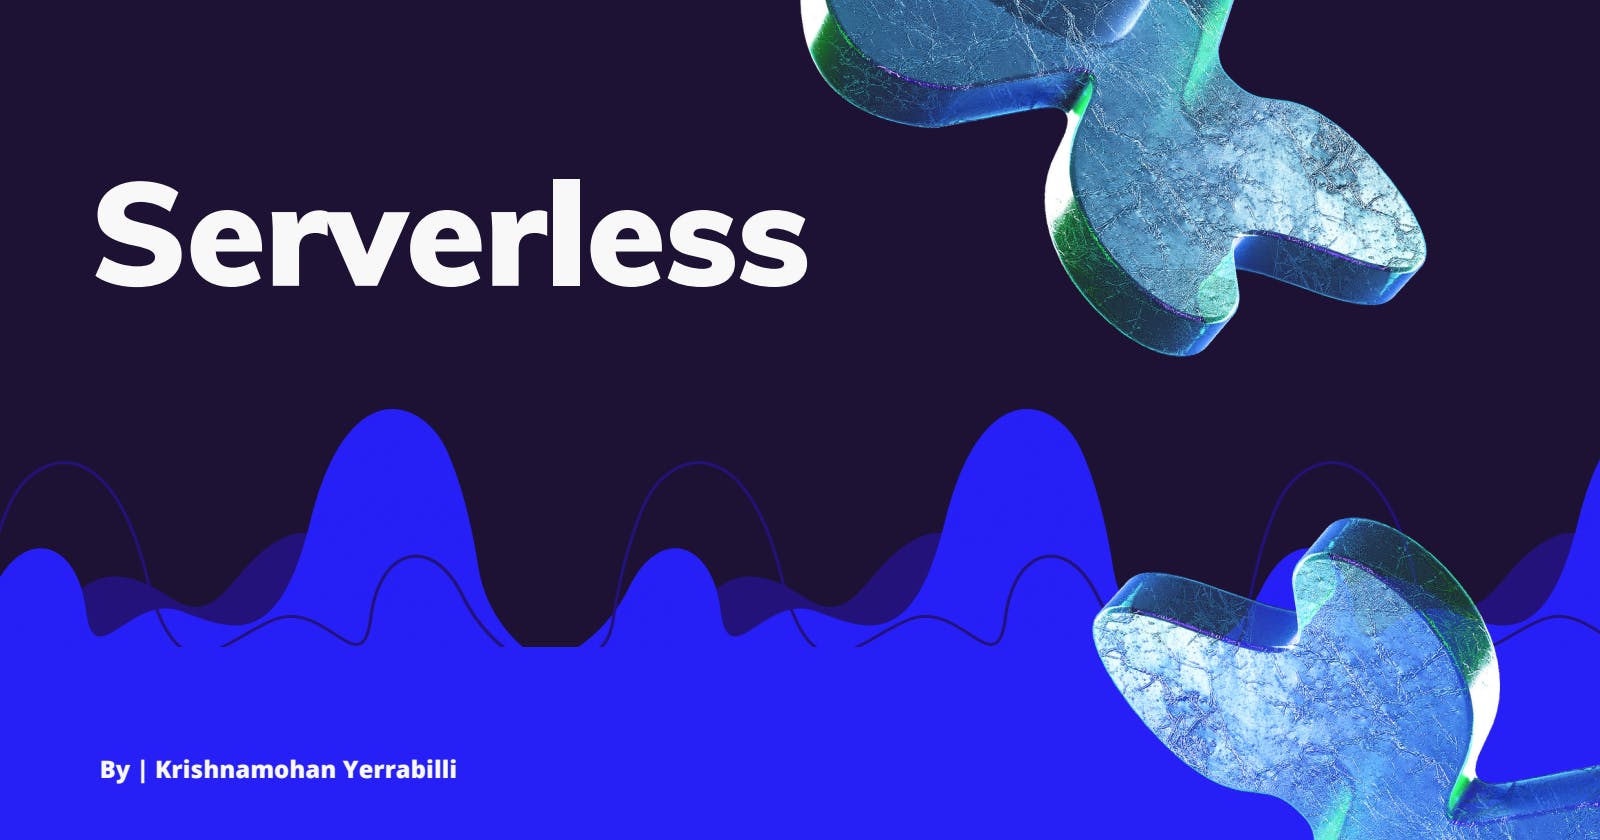 What Serverless is all about?